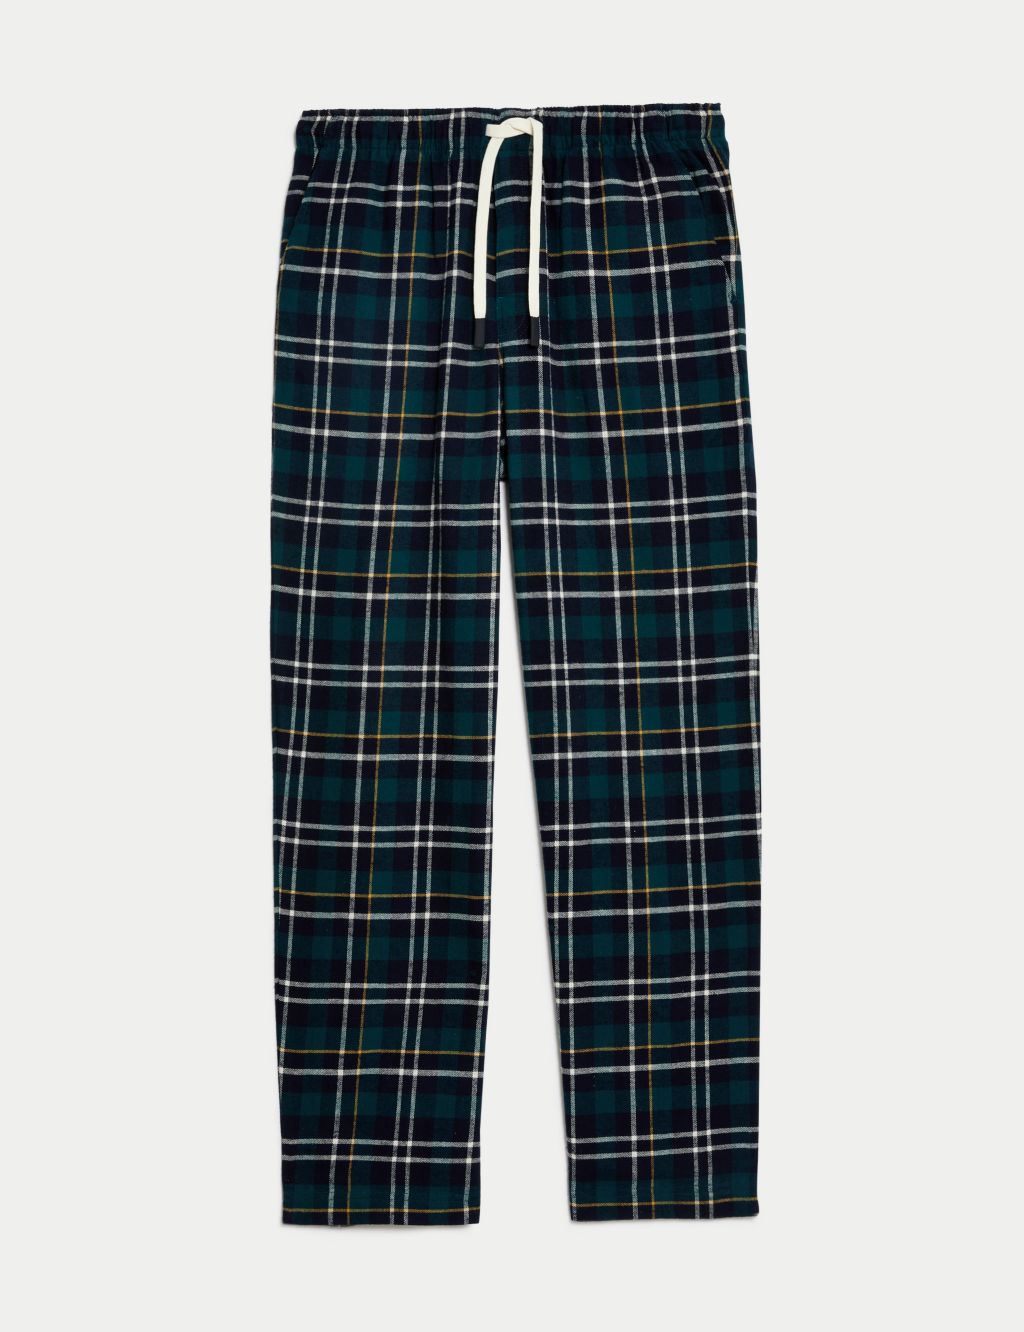 Brushed Cotton Checked Loungewear Bottoms image 2